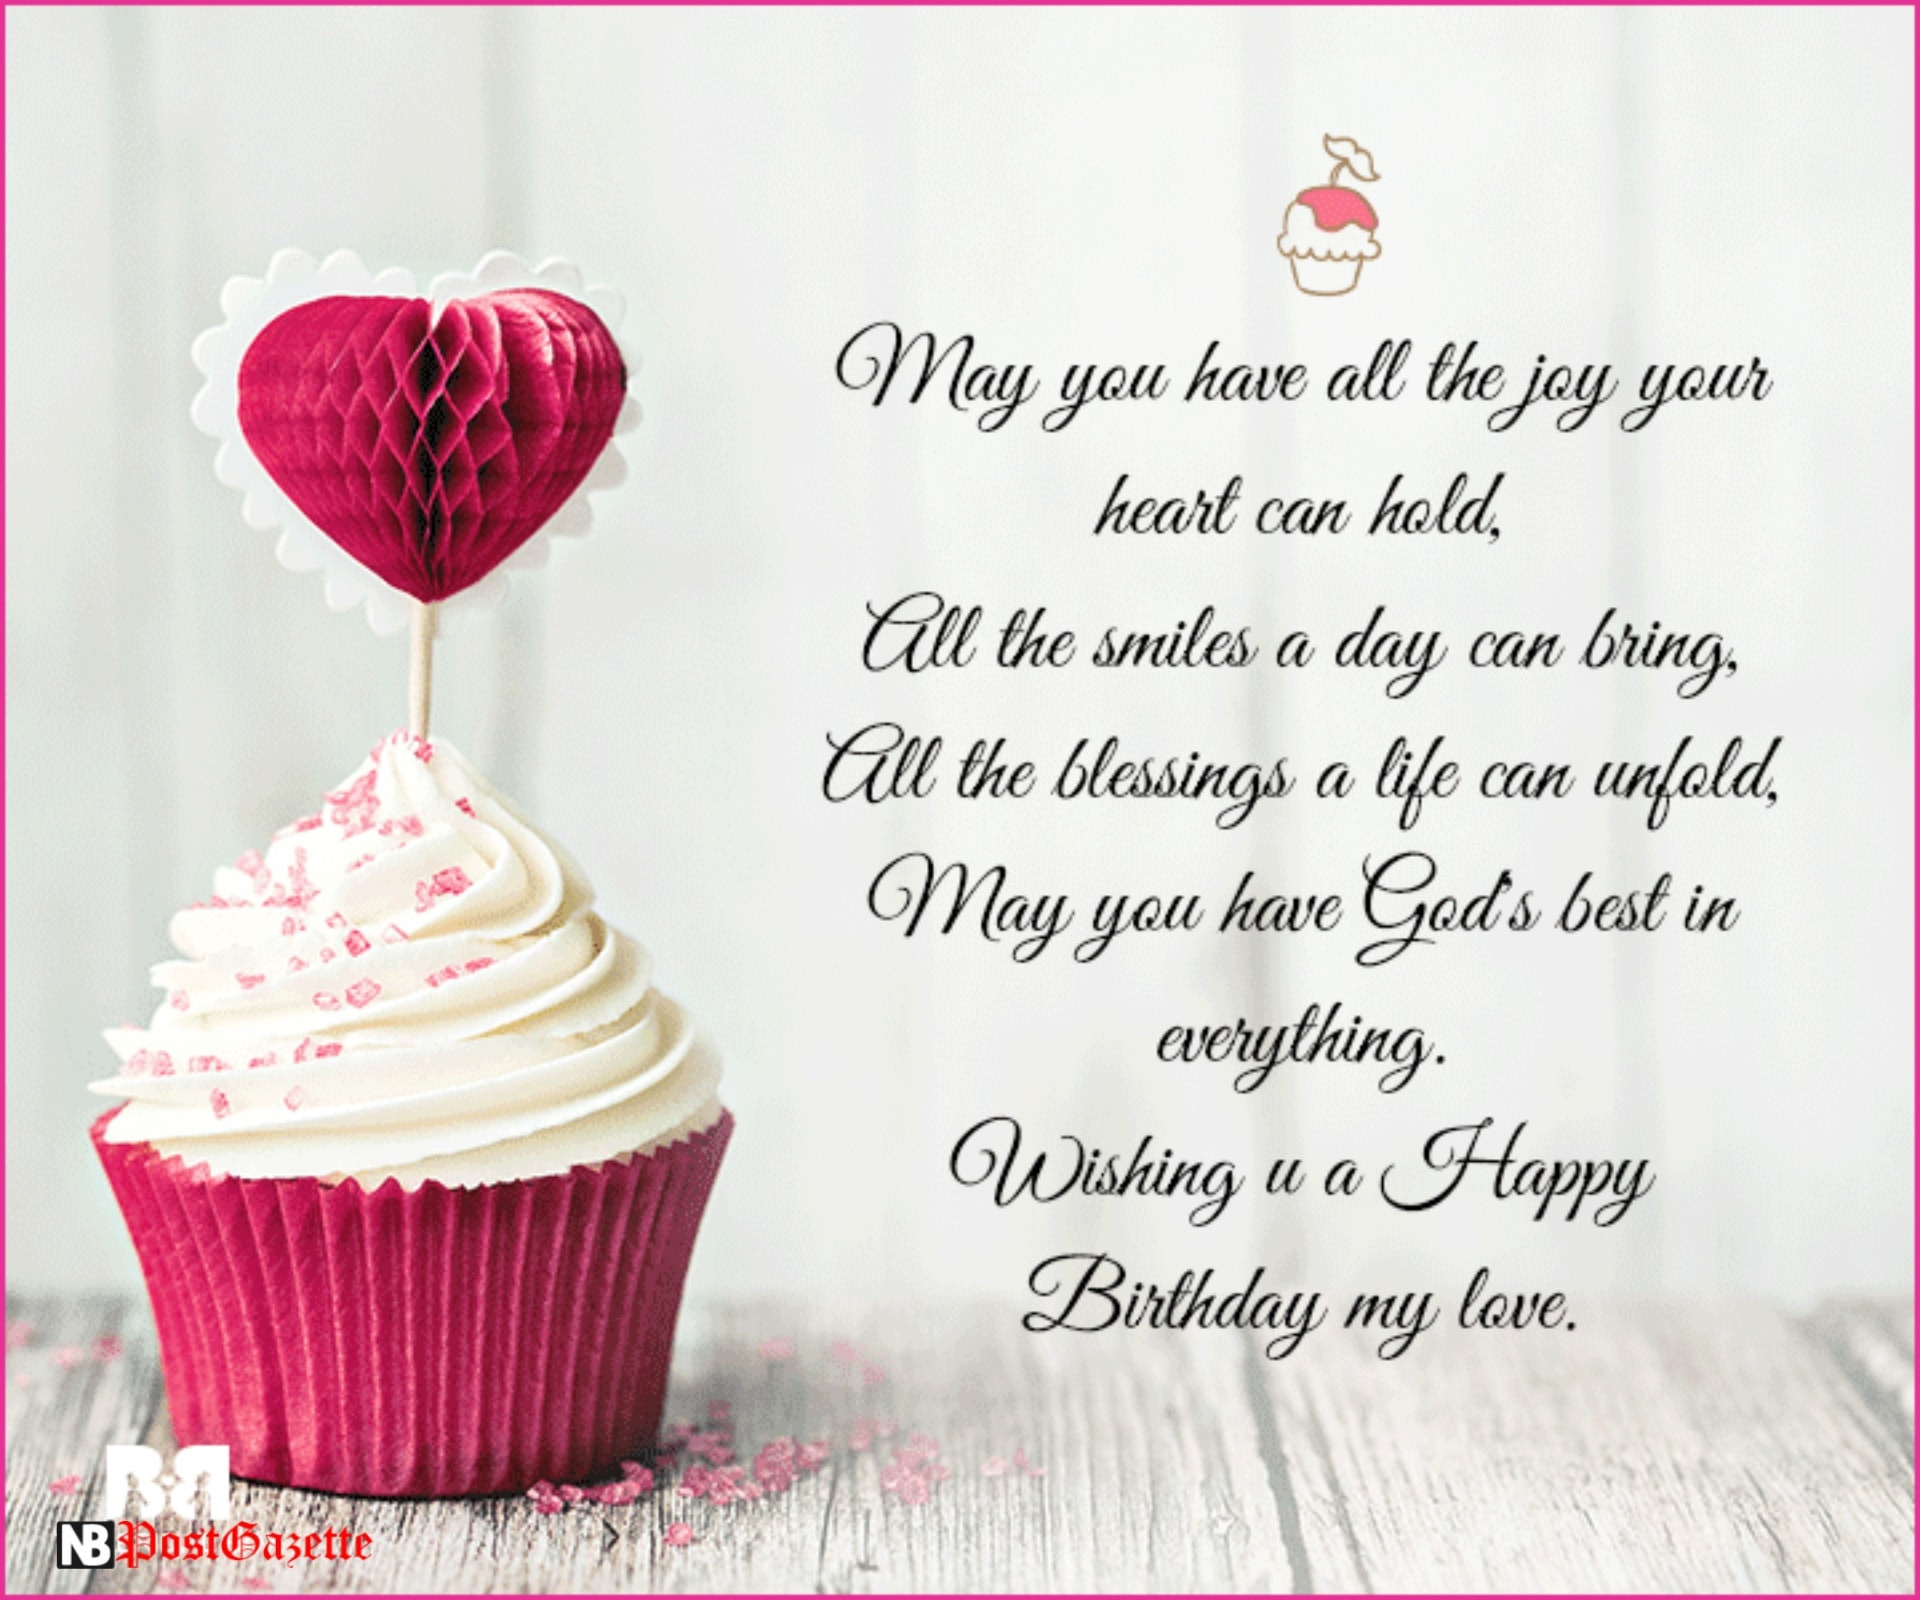 Birthday Wishes For Loved One
 Top Best Happy Birthday Wishes SMS Quotes & Text Messages